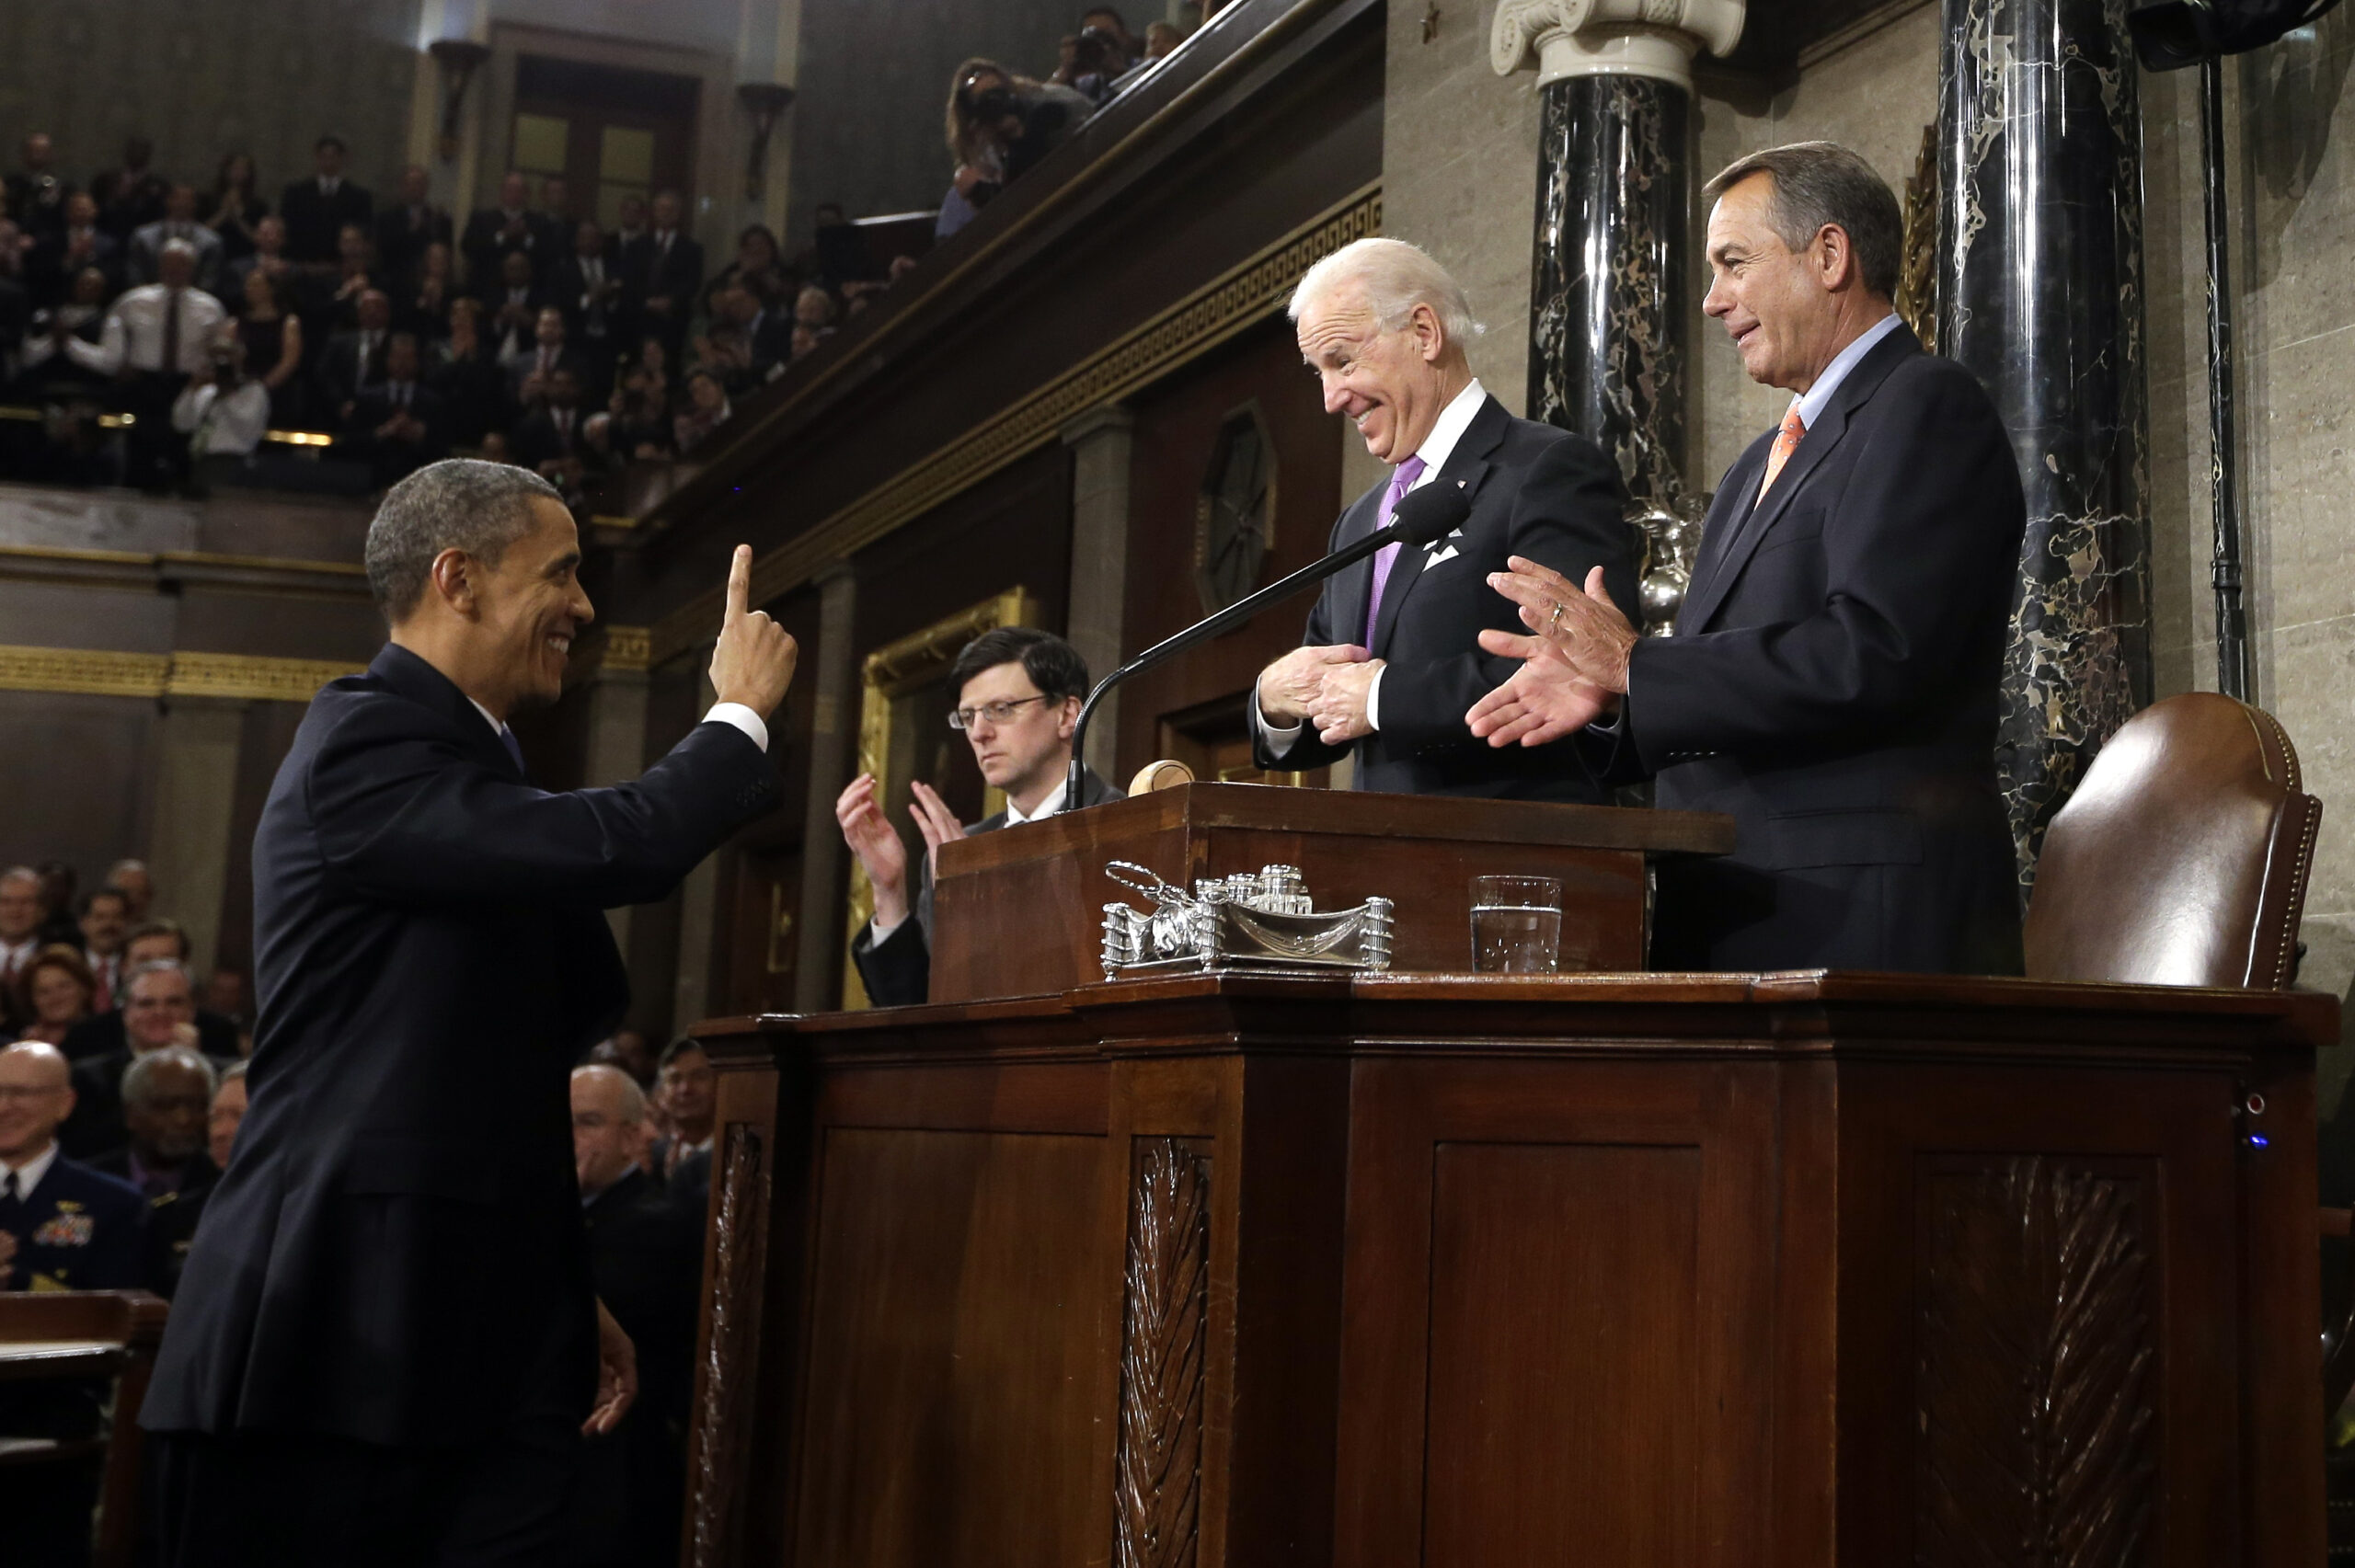 READ: The President’s State of the Union Address